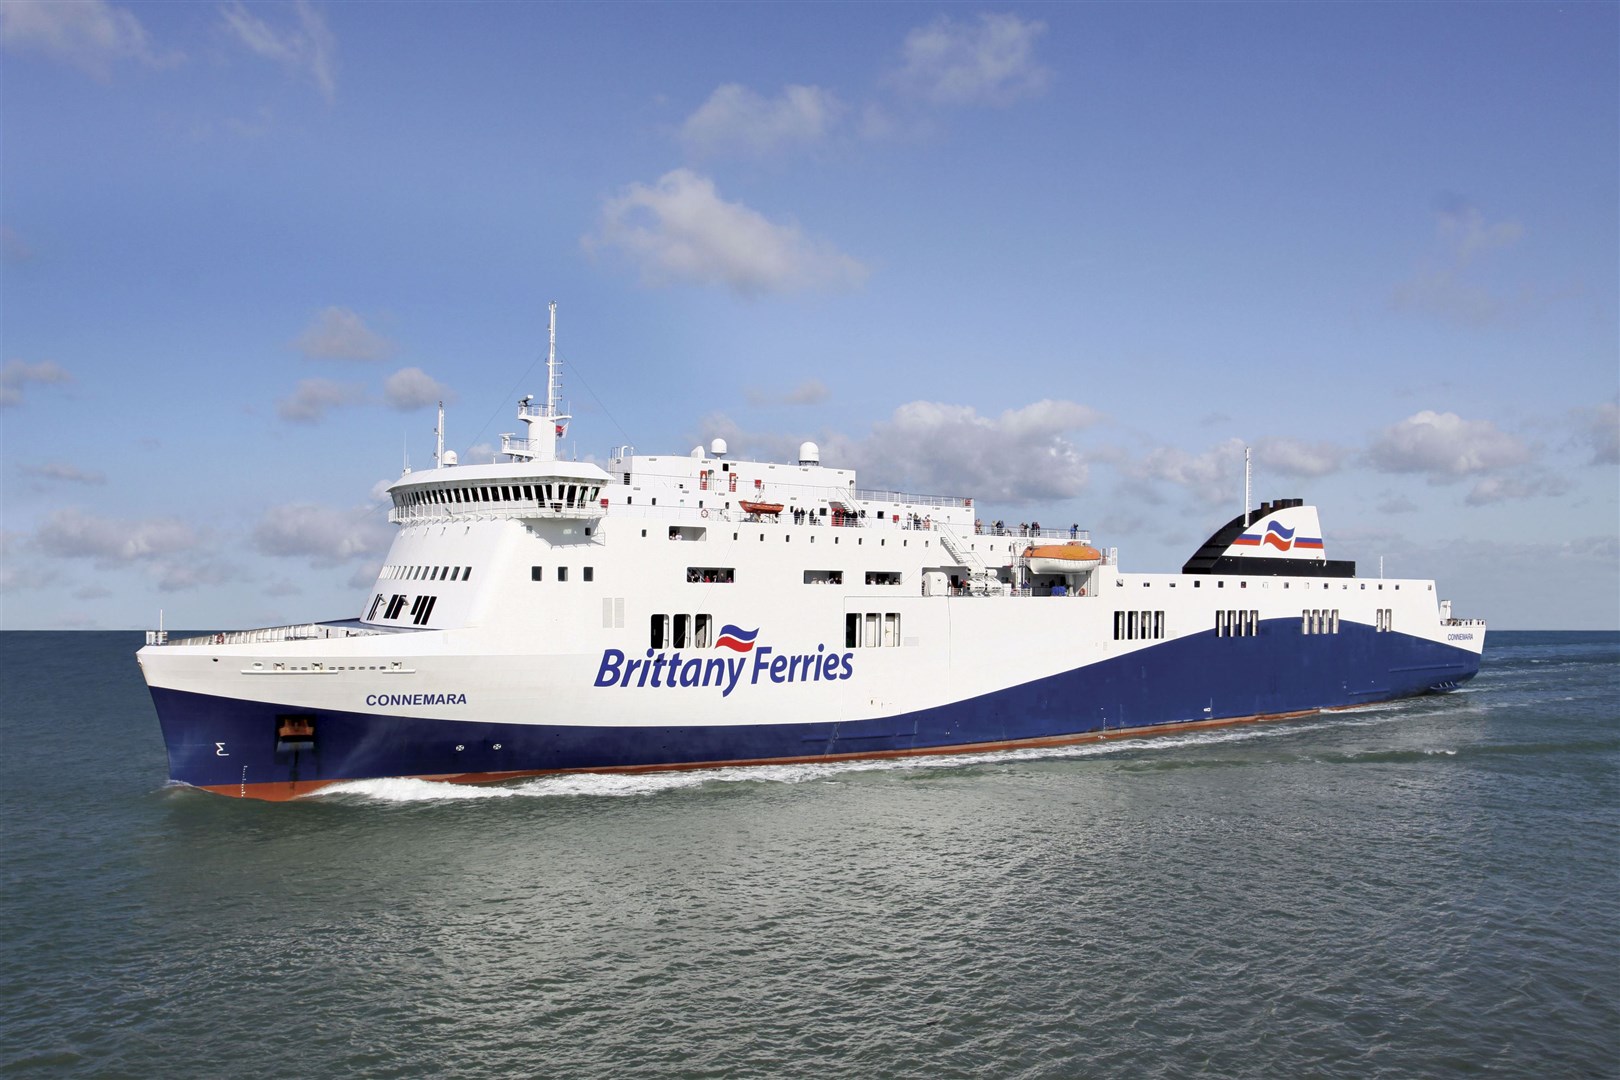 Brittany Ferries (Brittany Ferries/PA)